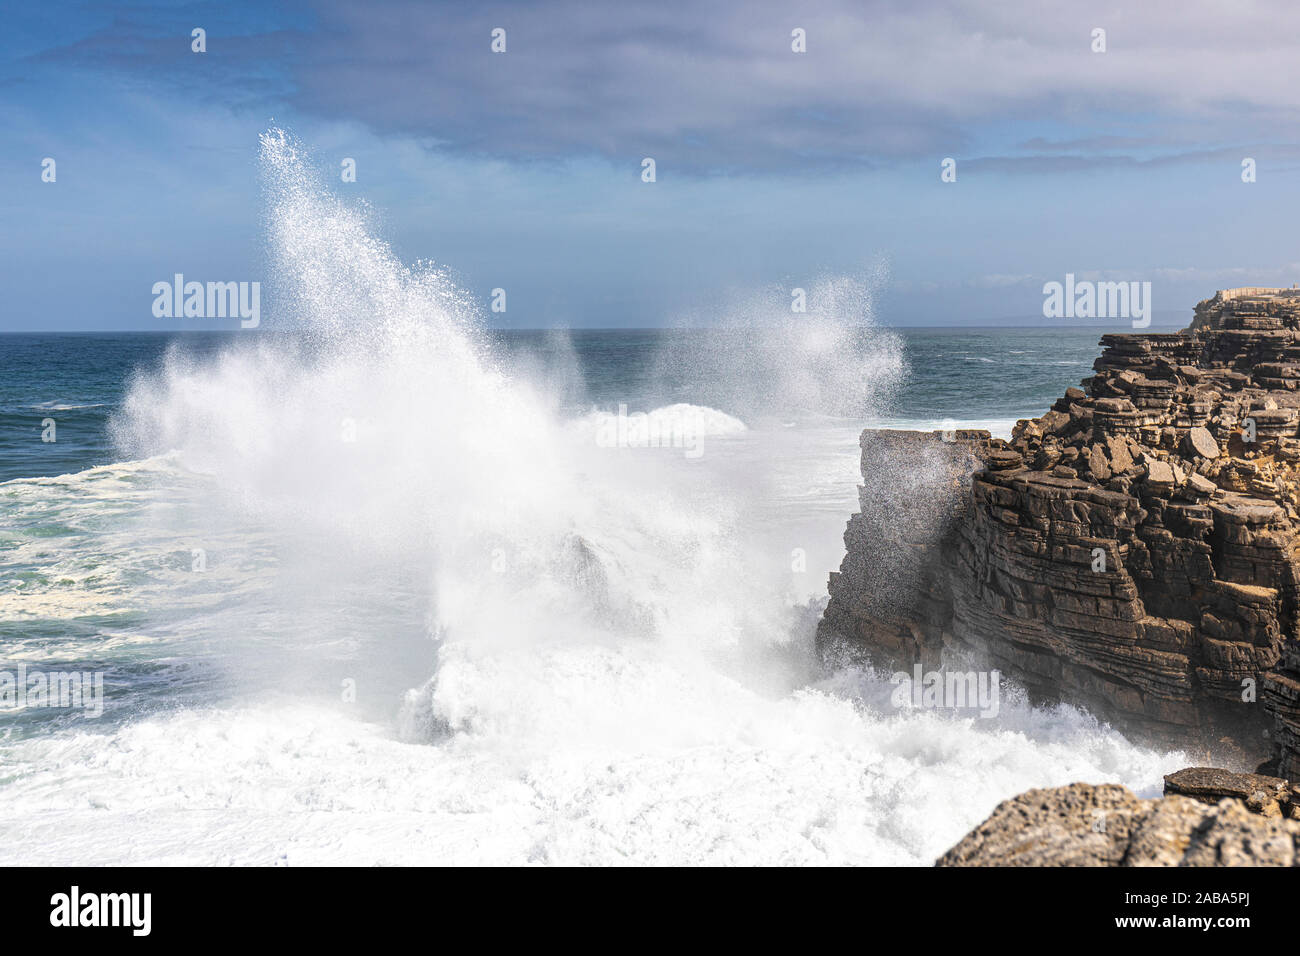 Breaking Atlantic swell hitting the cliffs at Peniche, Portugal Stock Photo